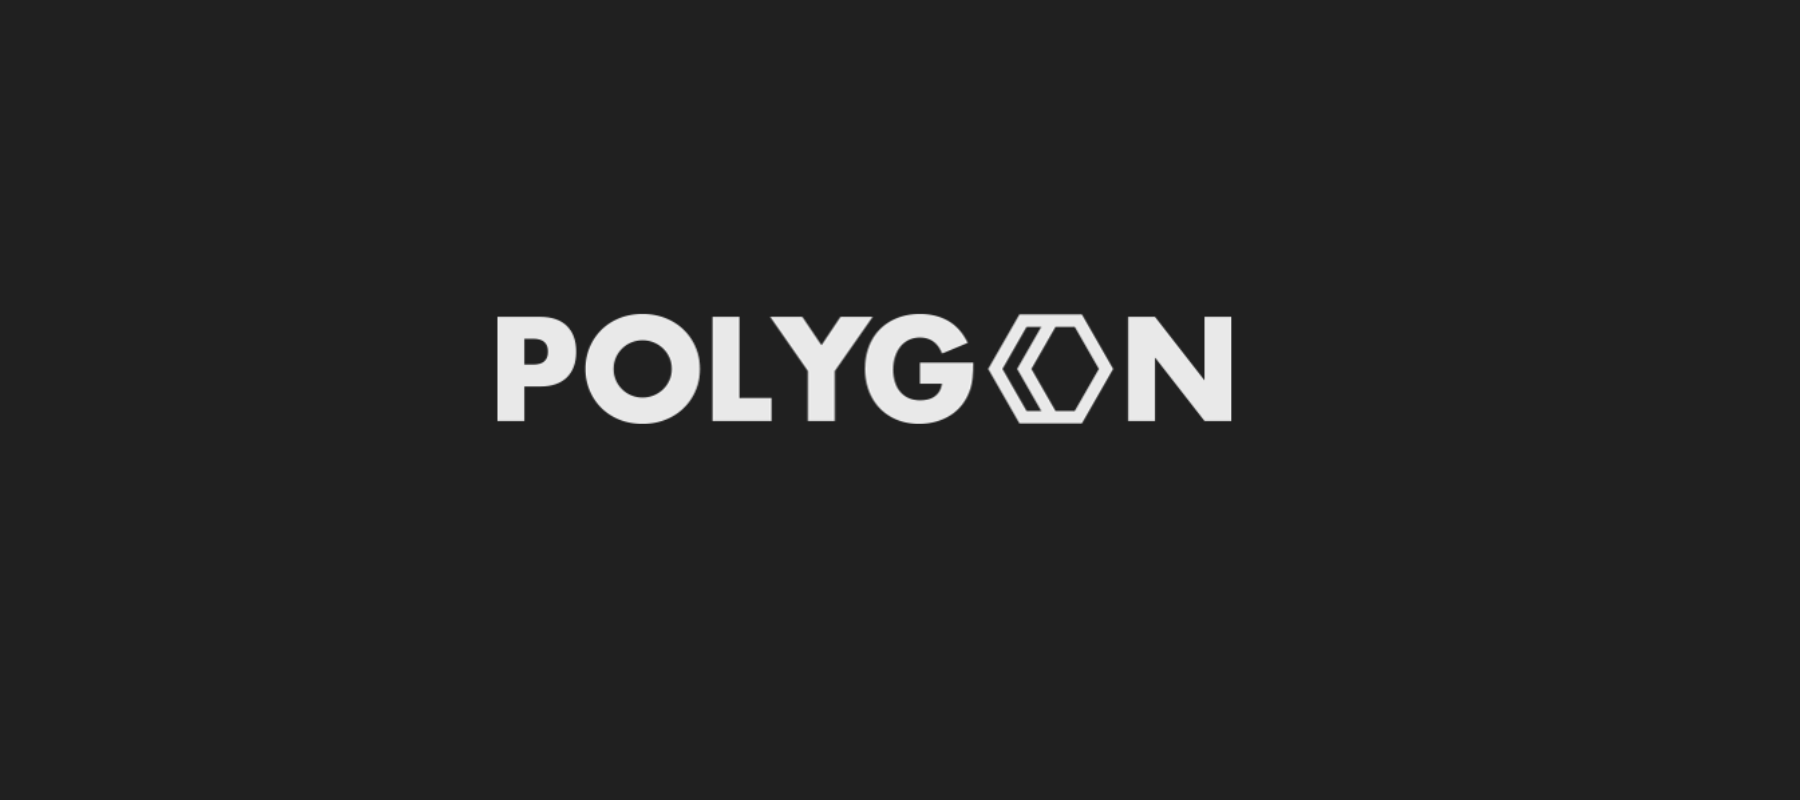 [South Africa] Polygon’s outdoor media network expands across Africa